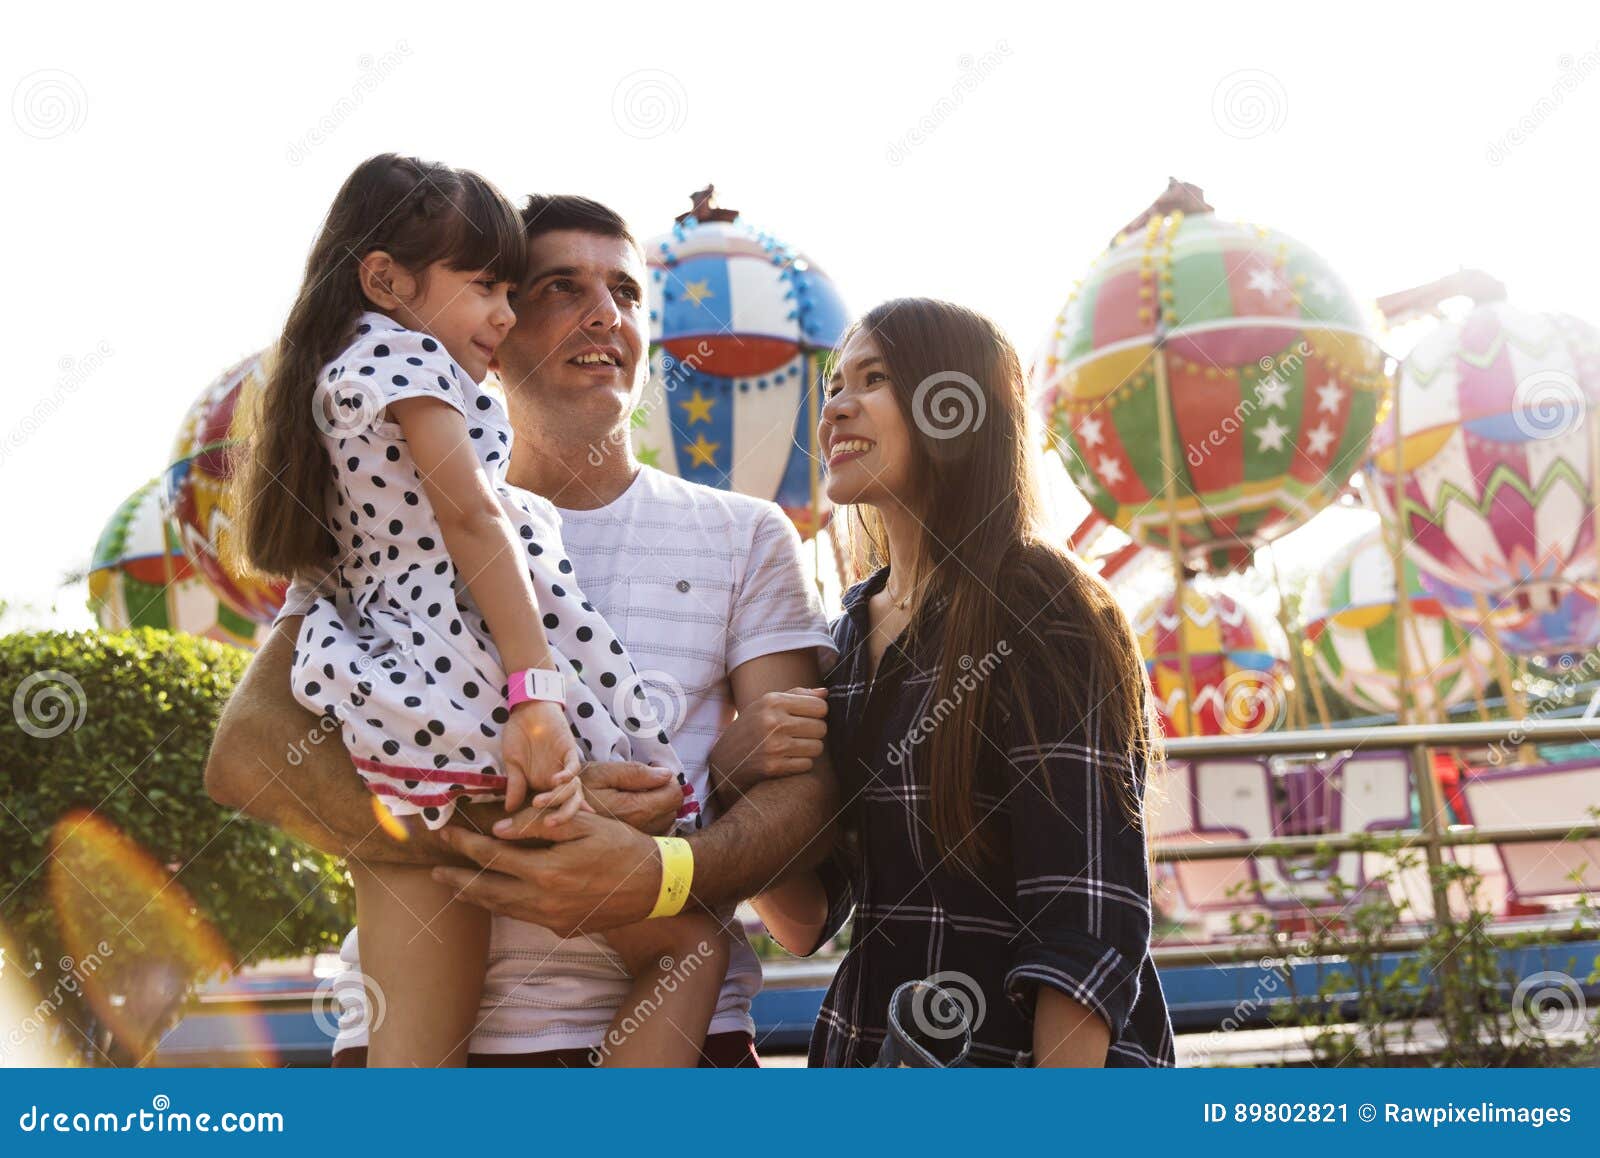 family holiday vacation amusement park togetherness